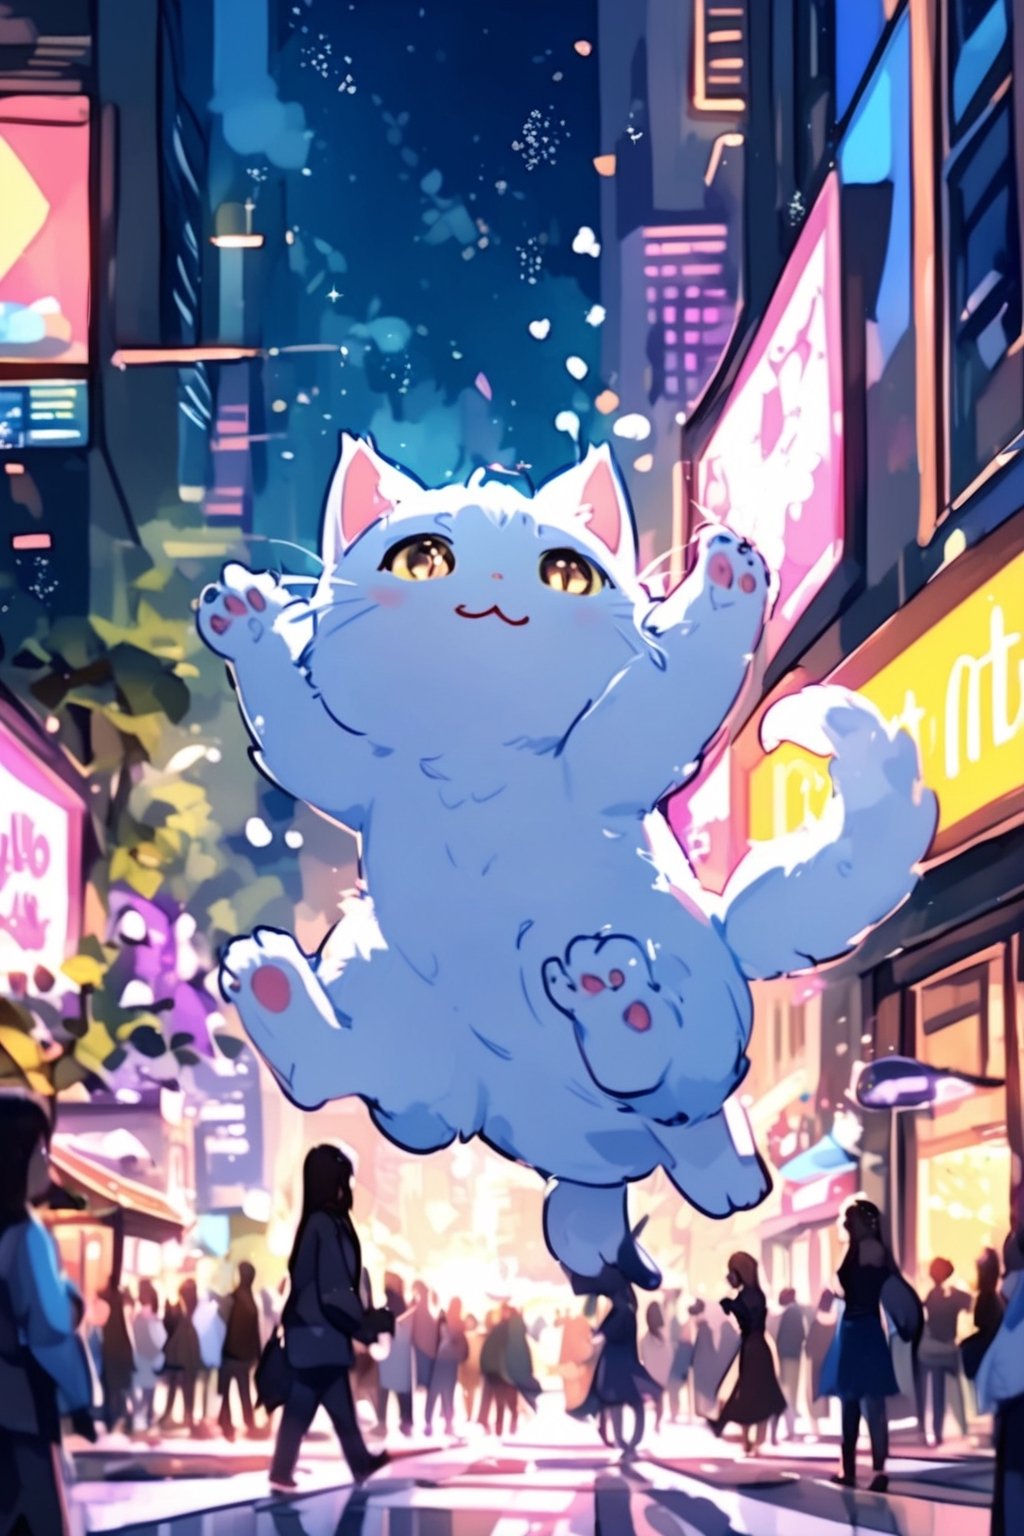 A fluffy white kitten, its fur as white as freshly fallen snow, pirouettes and twirls with unrestrained joy amidst the vibrant streets of a bustling metropolis. The kitten's playful antics bring a touch of whimsy to the otherwise serious cityscape, its graceful movements weaving through the towering skyscrapers and neon lights. In the background, the hustle and bustle of urban life continues unabated, with cars honking, pedestrians hurrying, and the sounds of distant music filling the air.

**Additional details:**

* The kitten is balancing on its hind legs, its front paws outstretched as it spins and leaps with exuberance.
* The kitten's eyes sparkle with mischief and delight, and its tail flicks back and forth in rhythm with its movements.
* The kitten is surrounded by people of all ages and walks of life, who pause to watch its playful dance with smiles on their faces.
* A few stray pigeons flutter around the kitten, intrigued by its unusual behavior.
